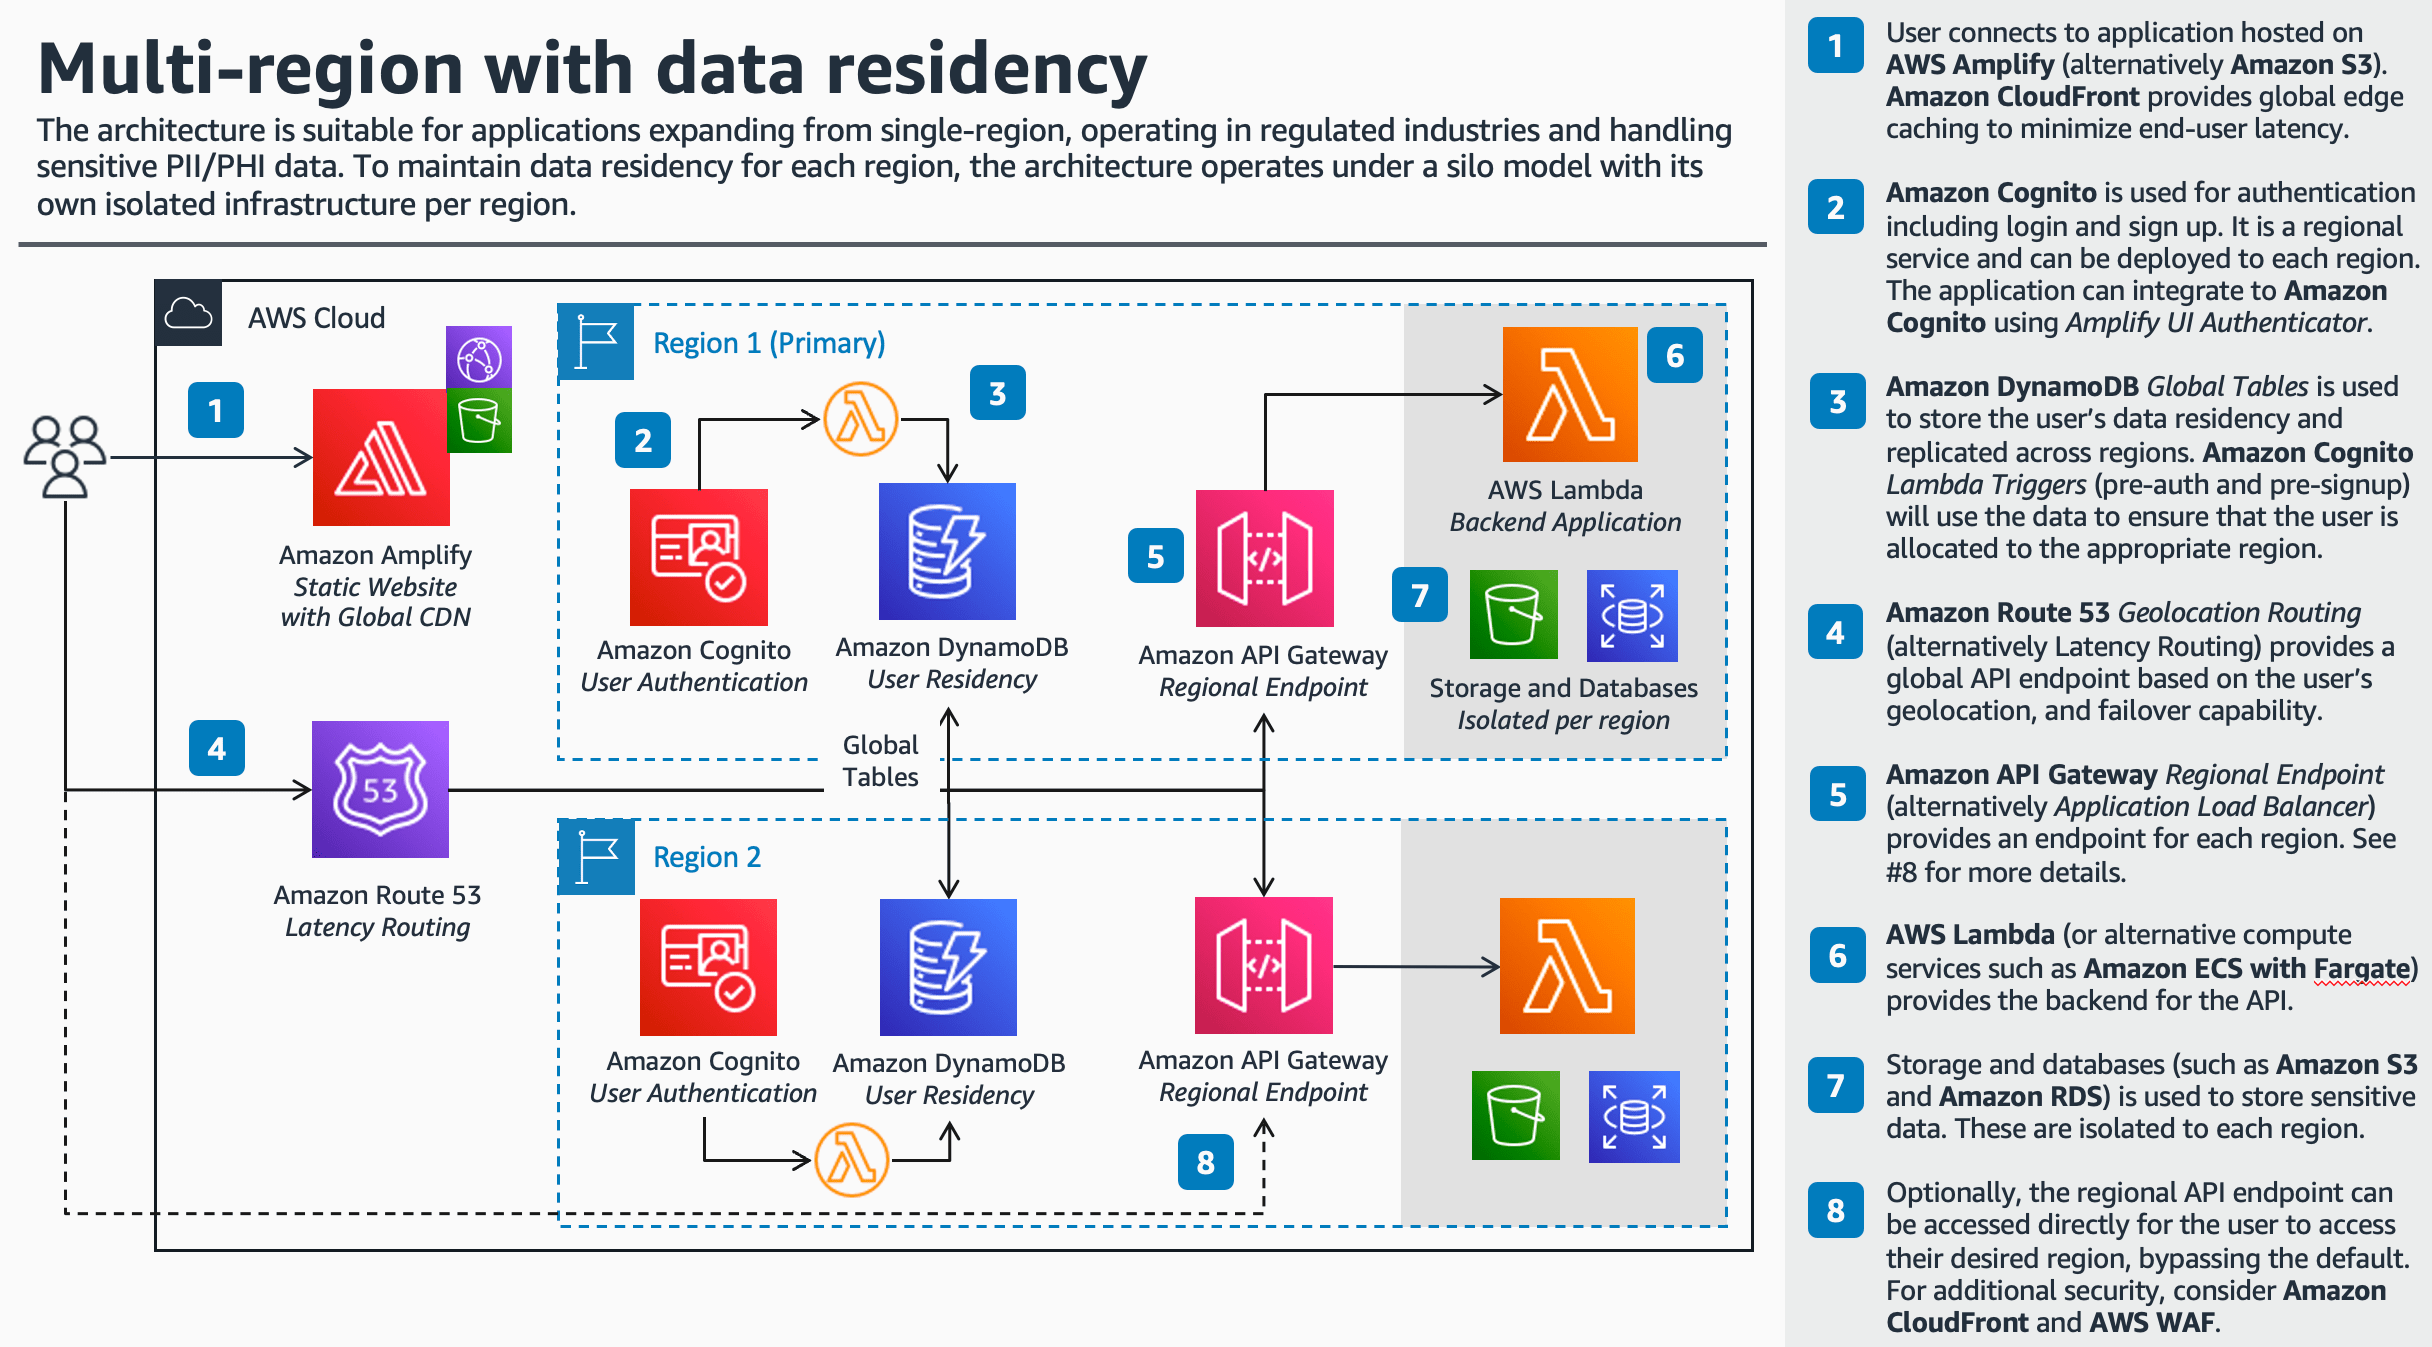 overview of the multi region data residency architecture